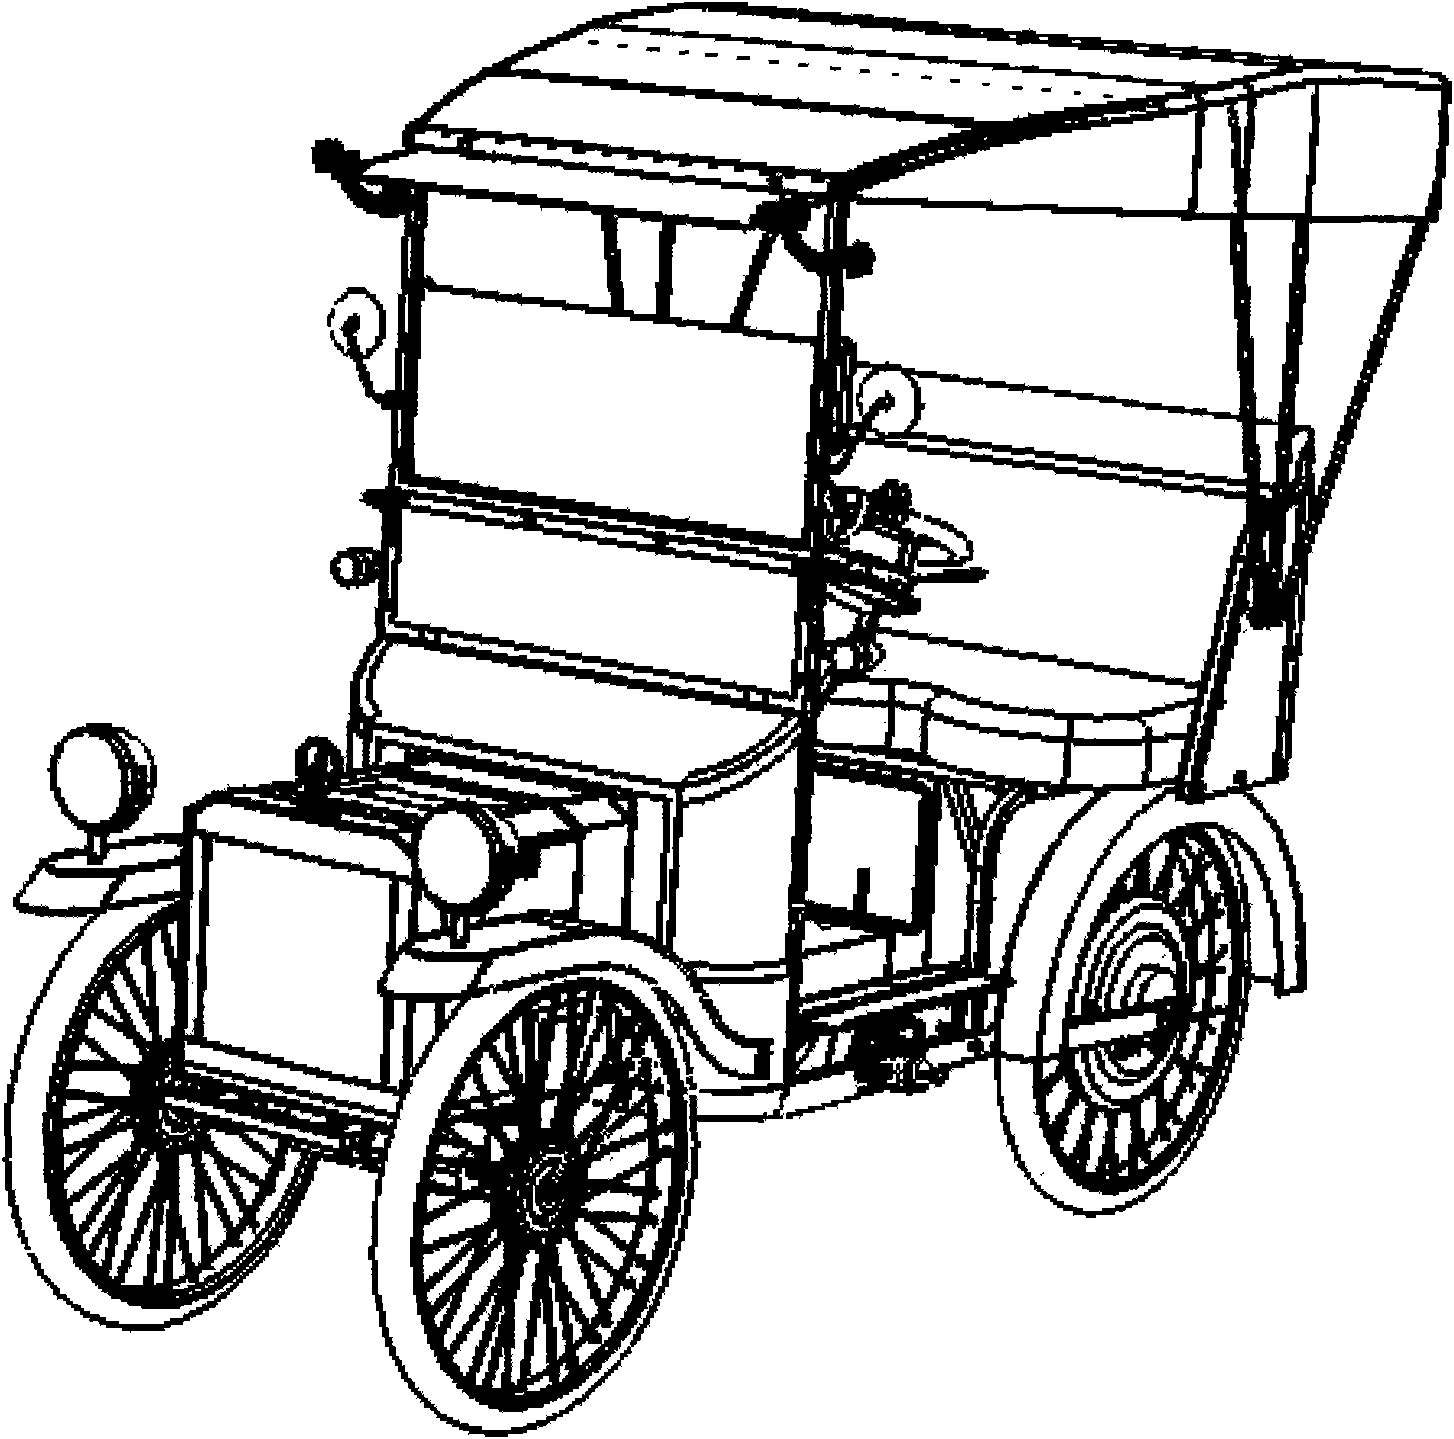 Four-wheel electric/foot-operated dual-mode vehicle